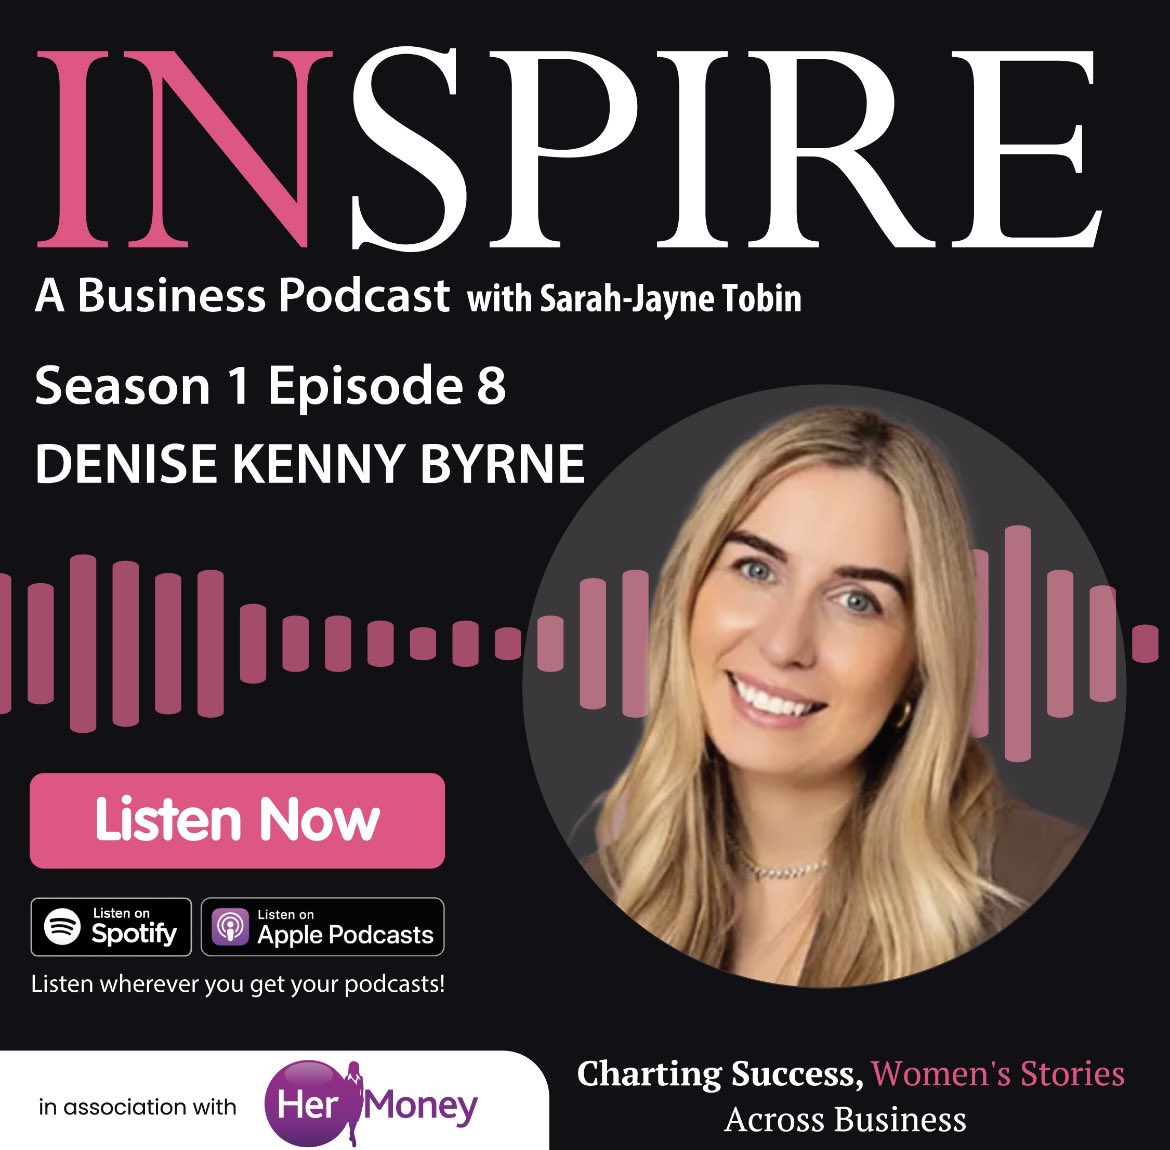 A new episode of INSPIRE lands tomorrow with the absolute powerhouse that is Denise Kenny Byrne, creator of The Head Plan! Tune in wherever you get your podcasts. @hermoneycwm @evokedotie #hermoney #financialfreedom #financialempowerment #wealthmanagement #womeninfinance